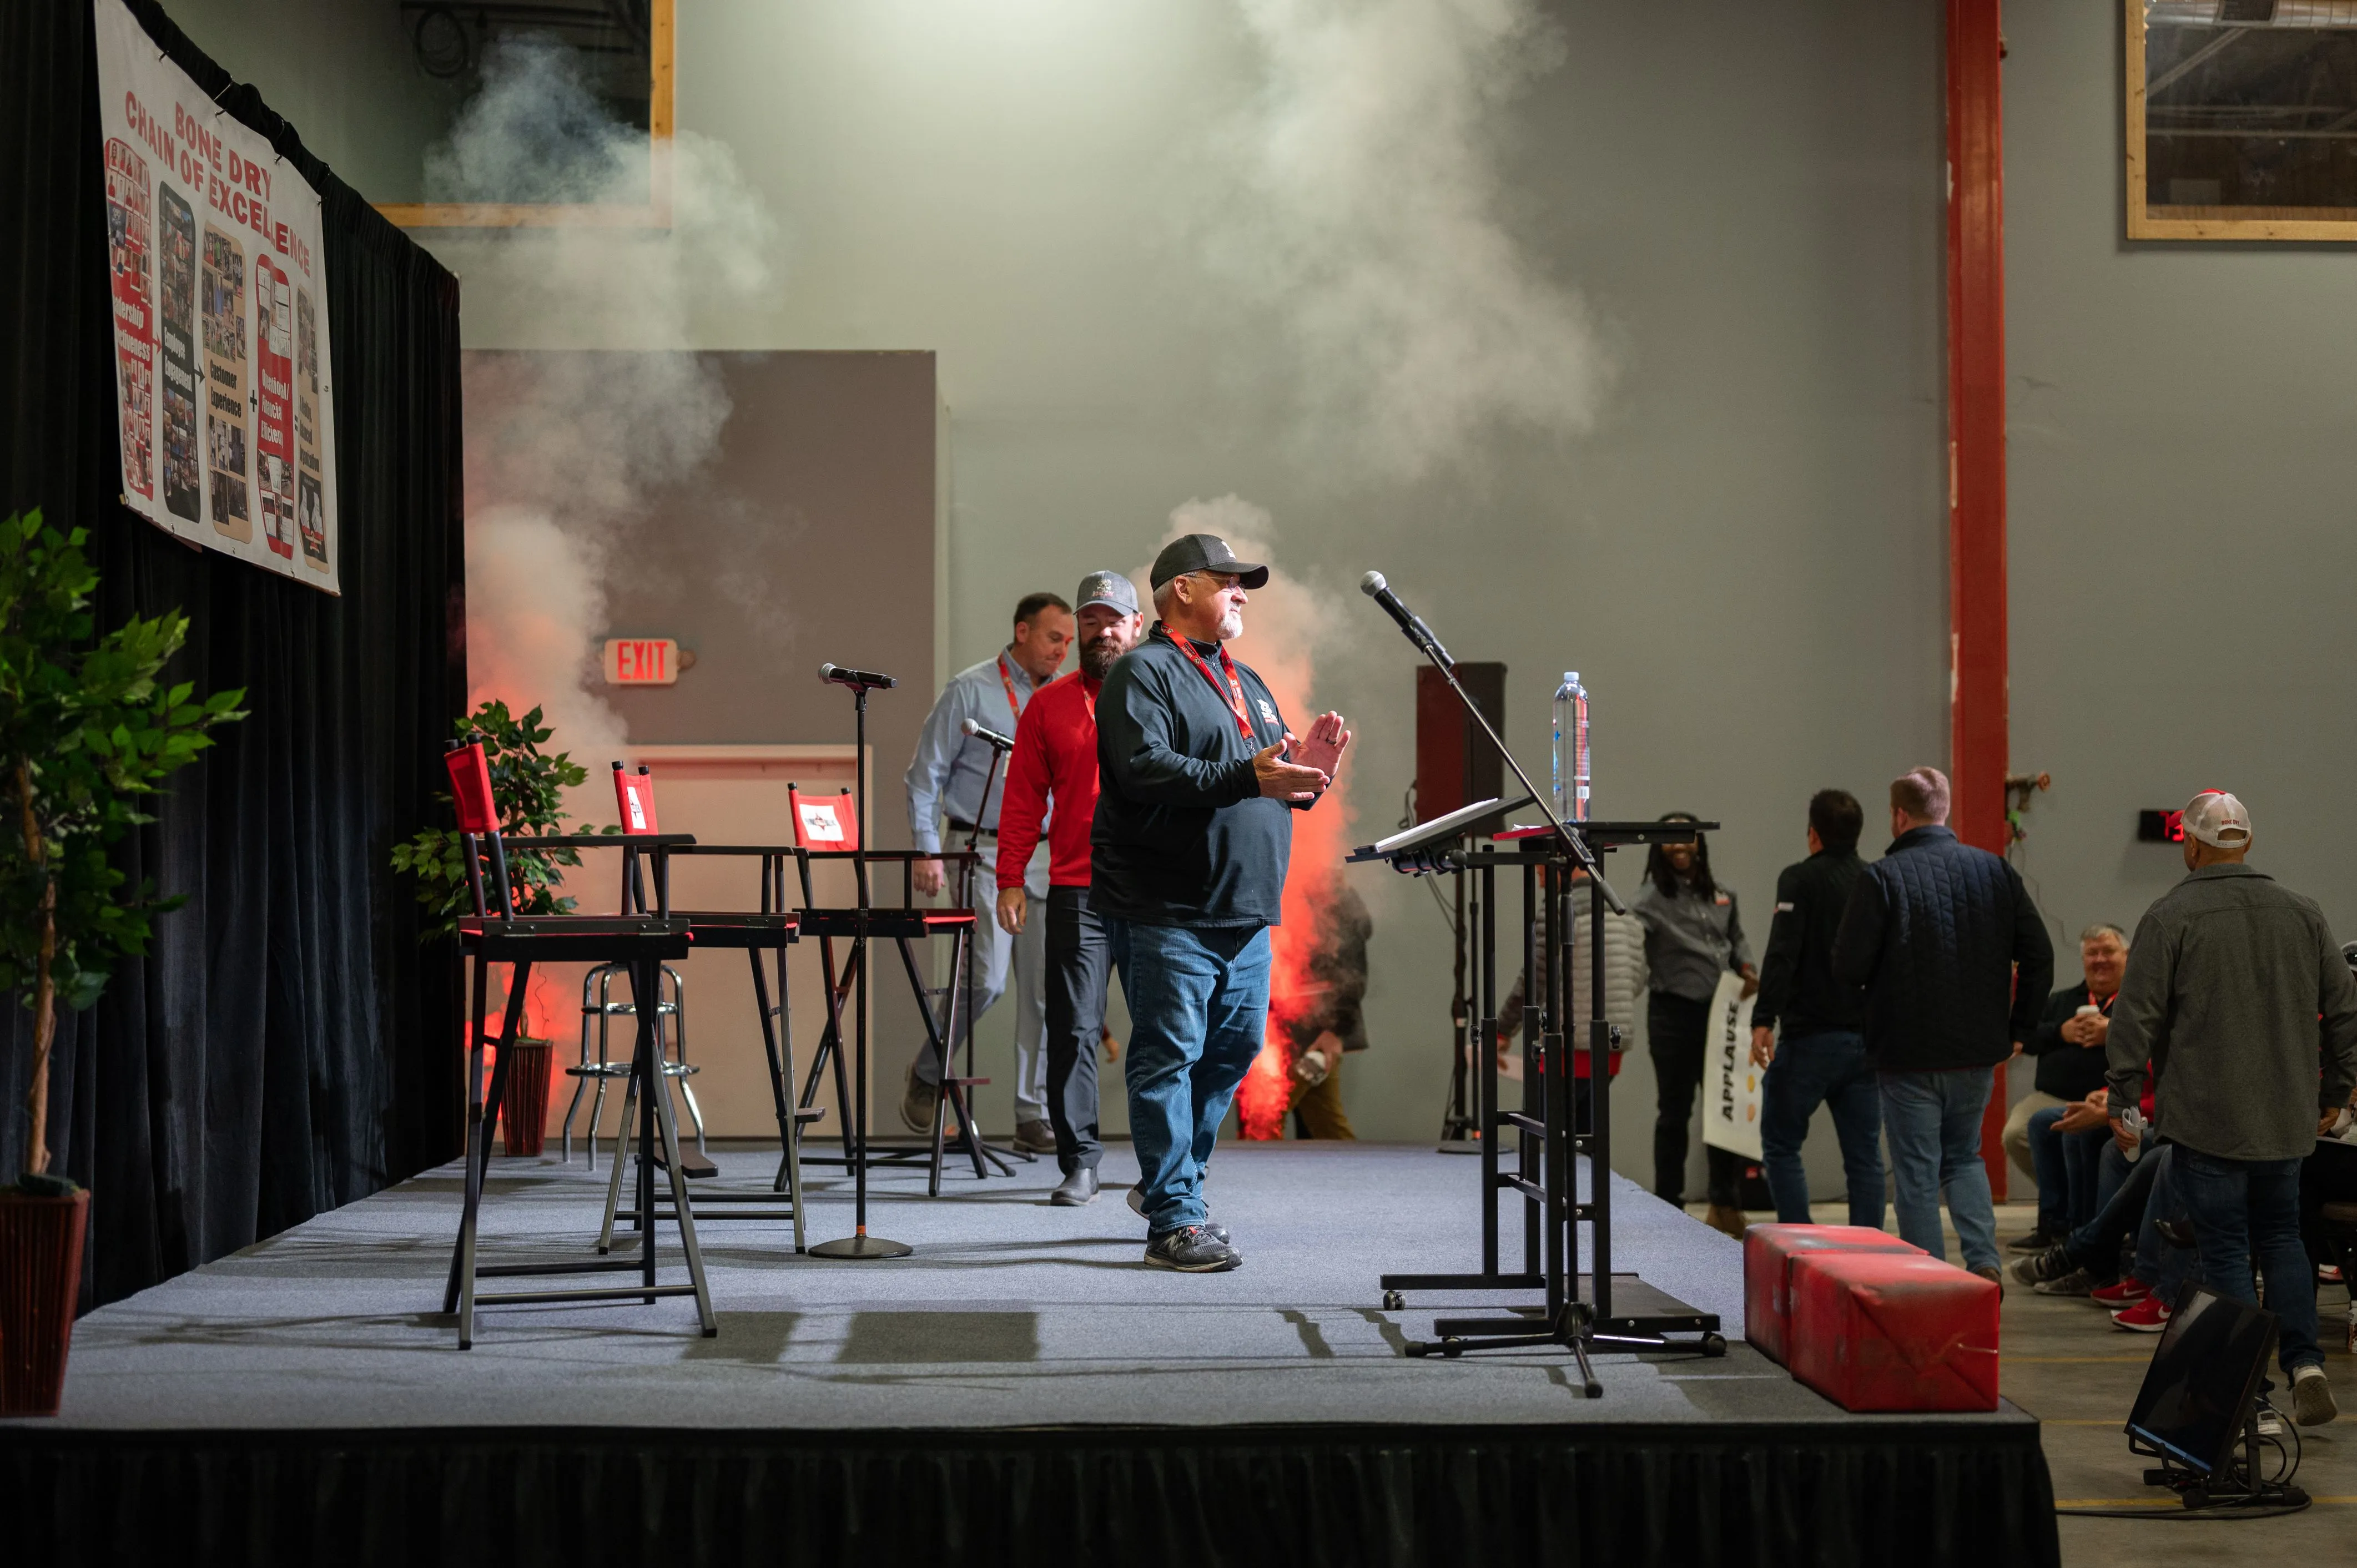 People walking on a stage with musical equipment and smoke effects during an event.